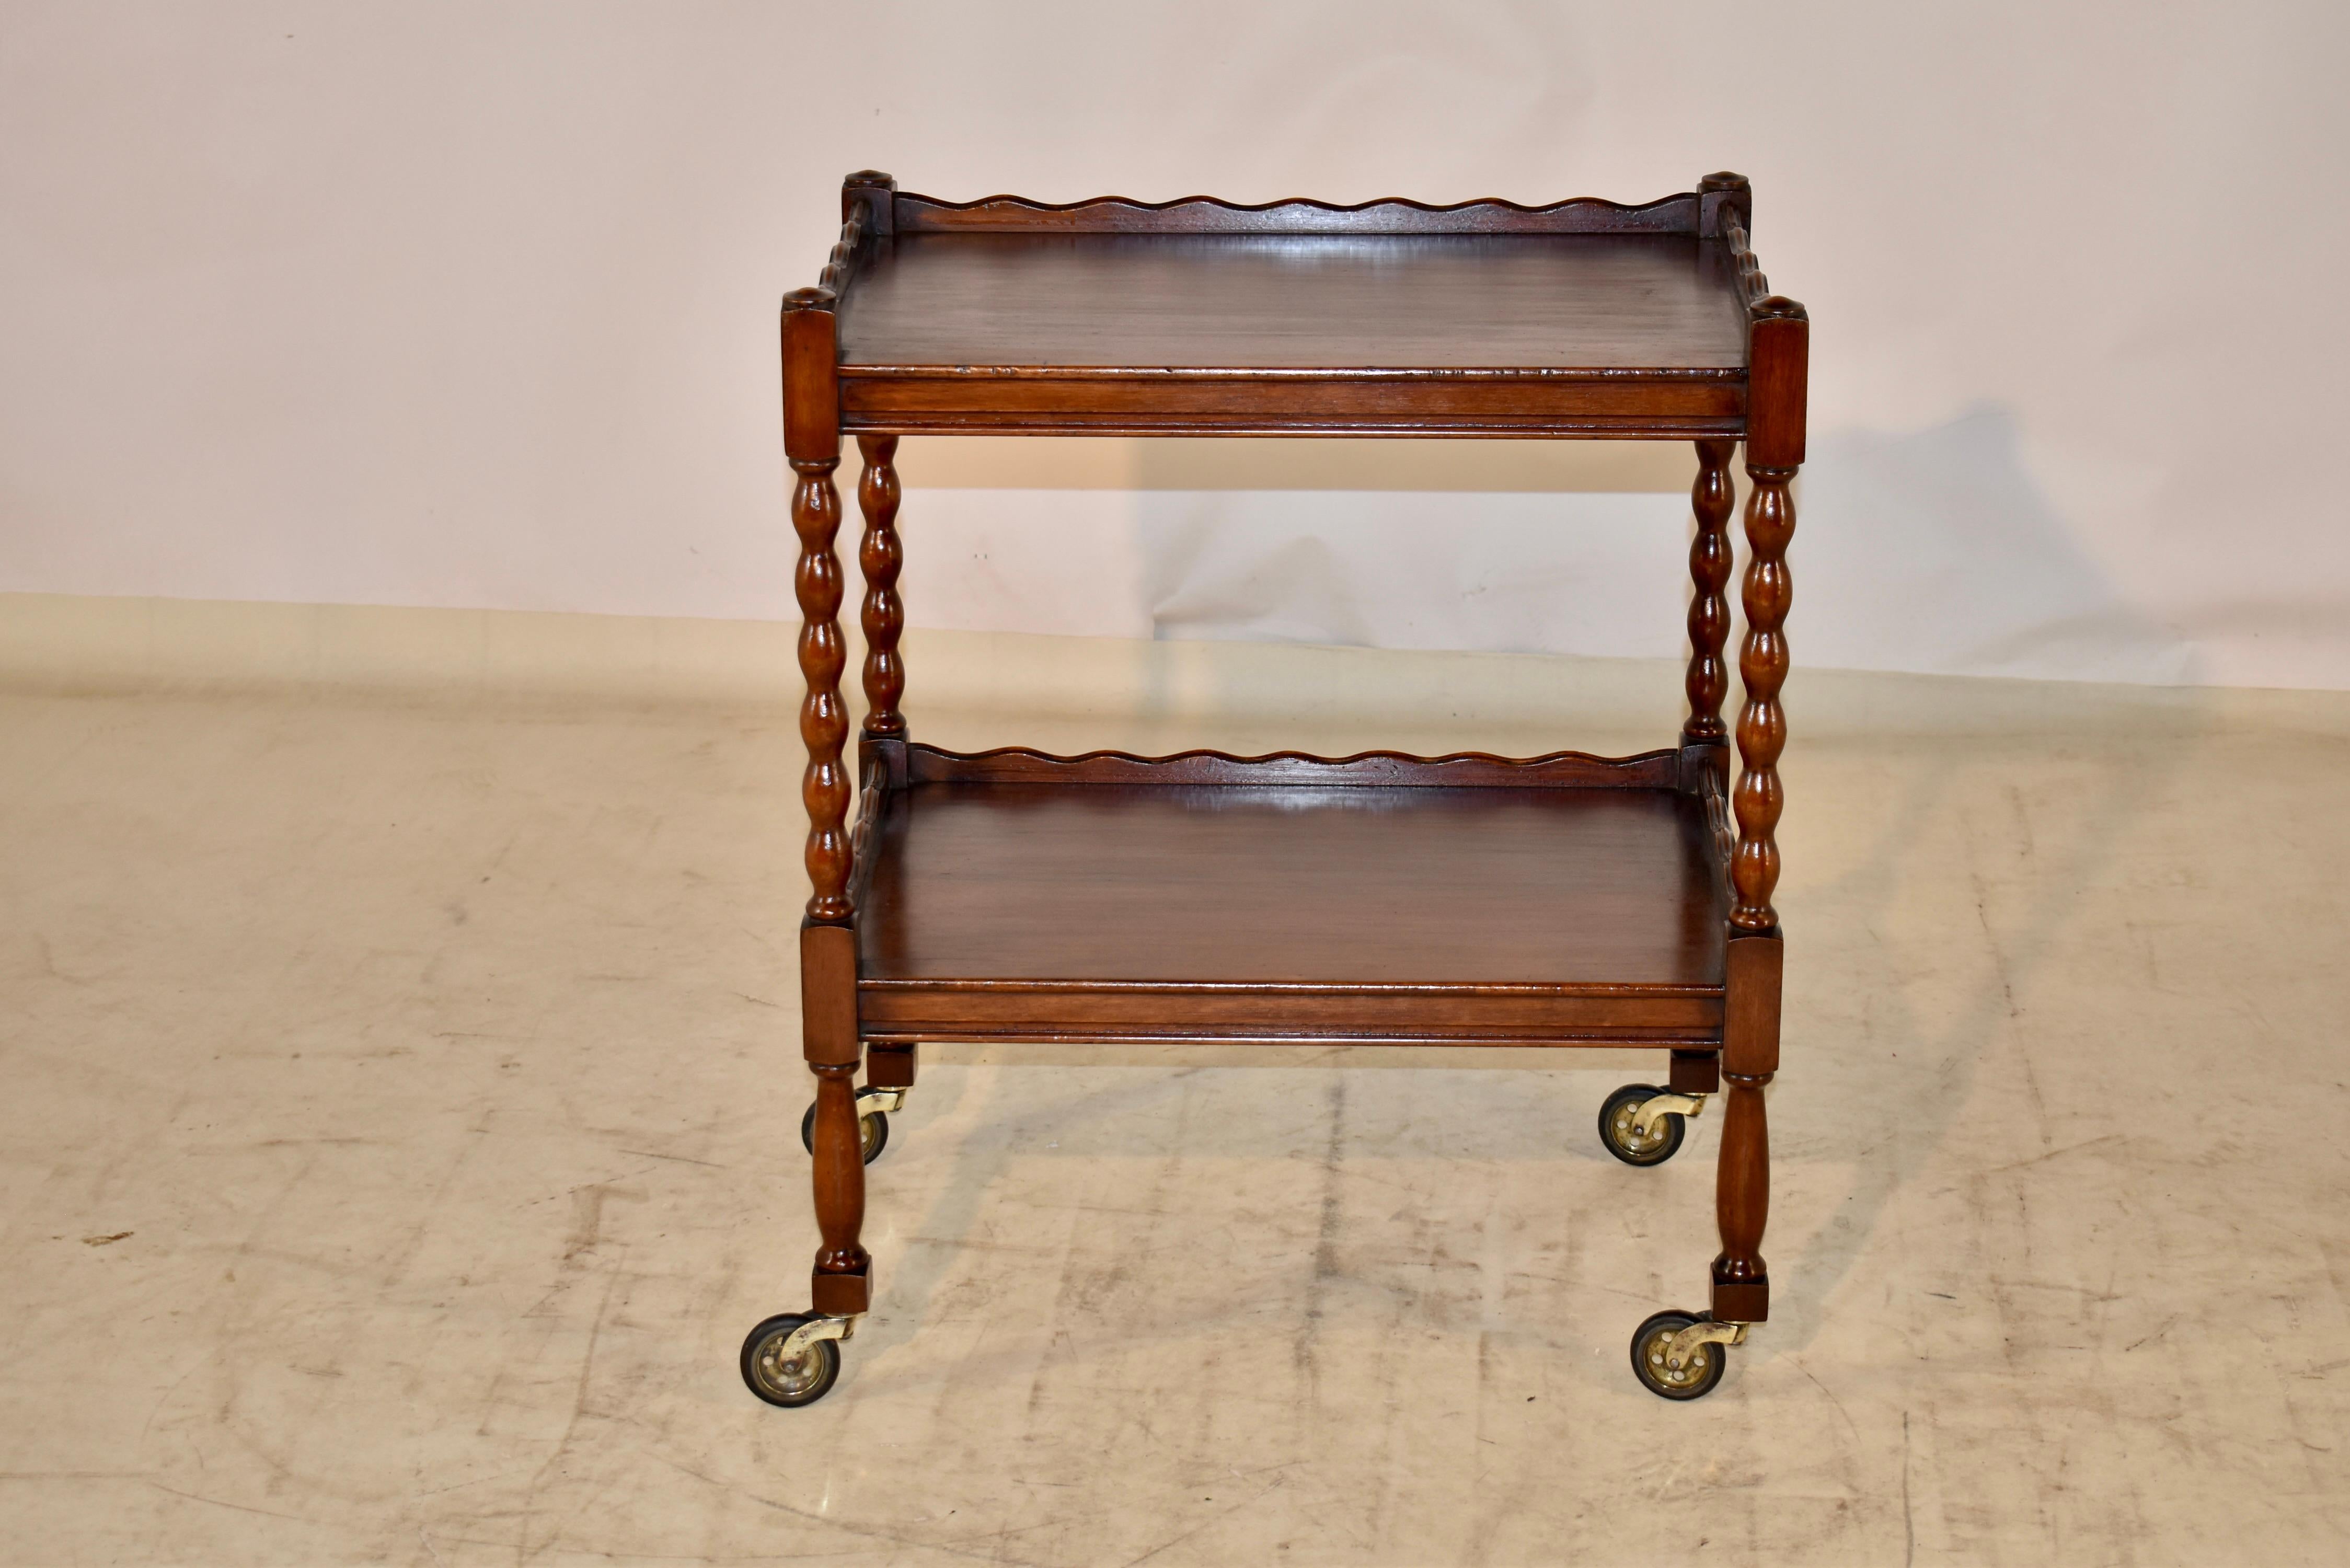 Edwardian oak drinks cart from England. The cart has two shelves, both with hand scalloped galleries on three sides for easy tray removal on the front side. The shelves are separated by hand turned bobbin style legs, and supported on hand turned